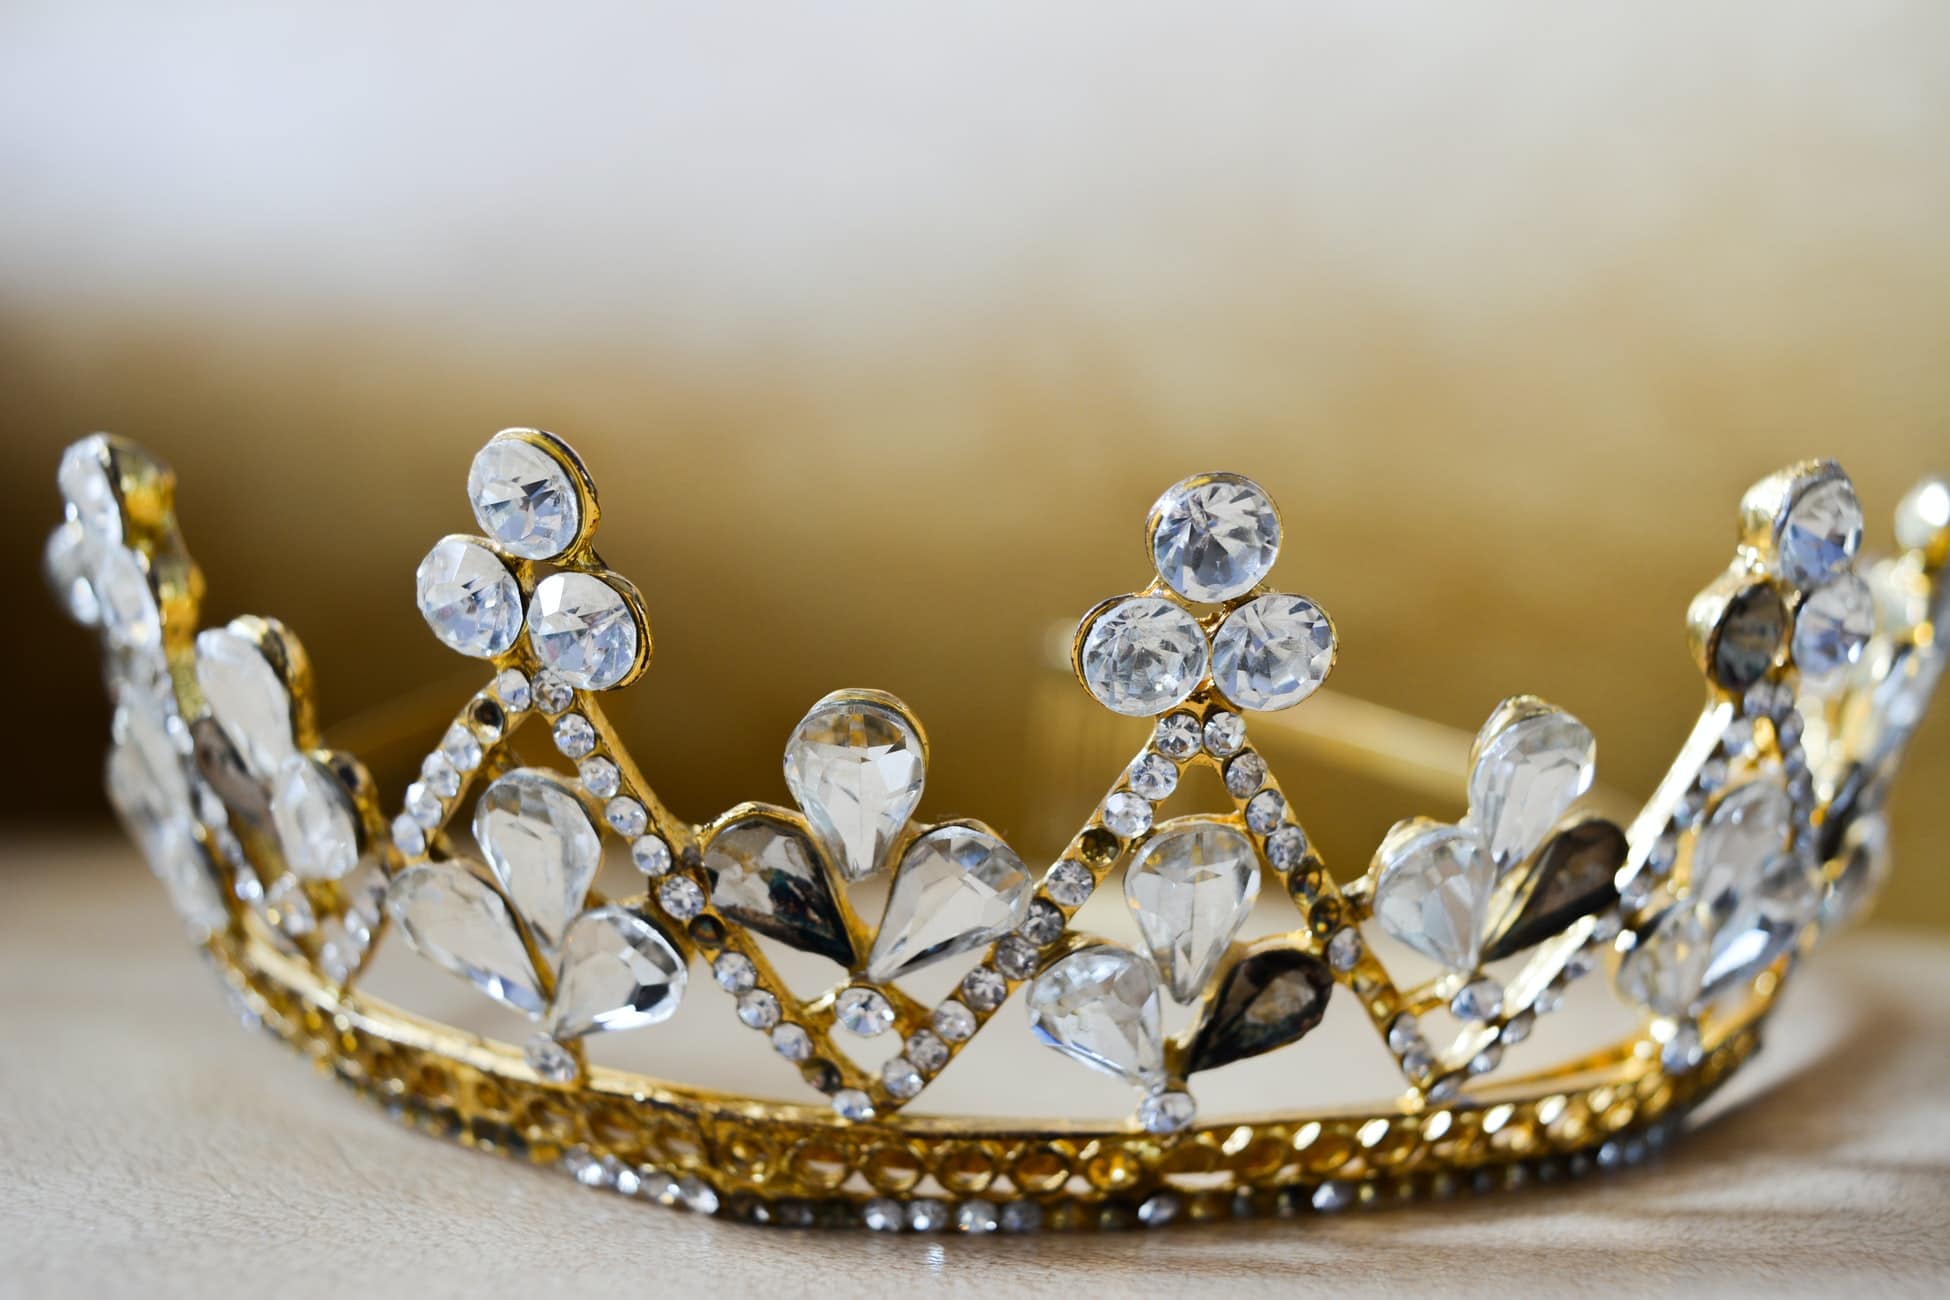 Image showing gold crown with diamonds